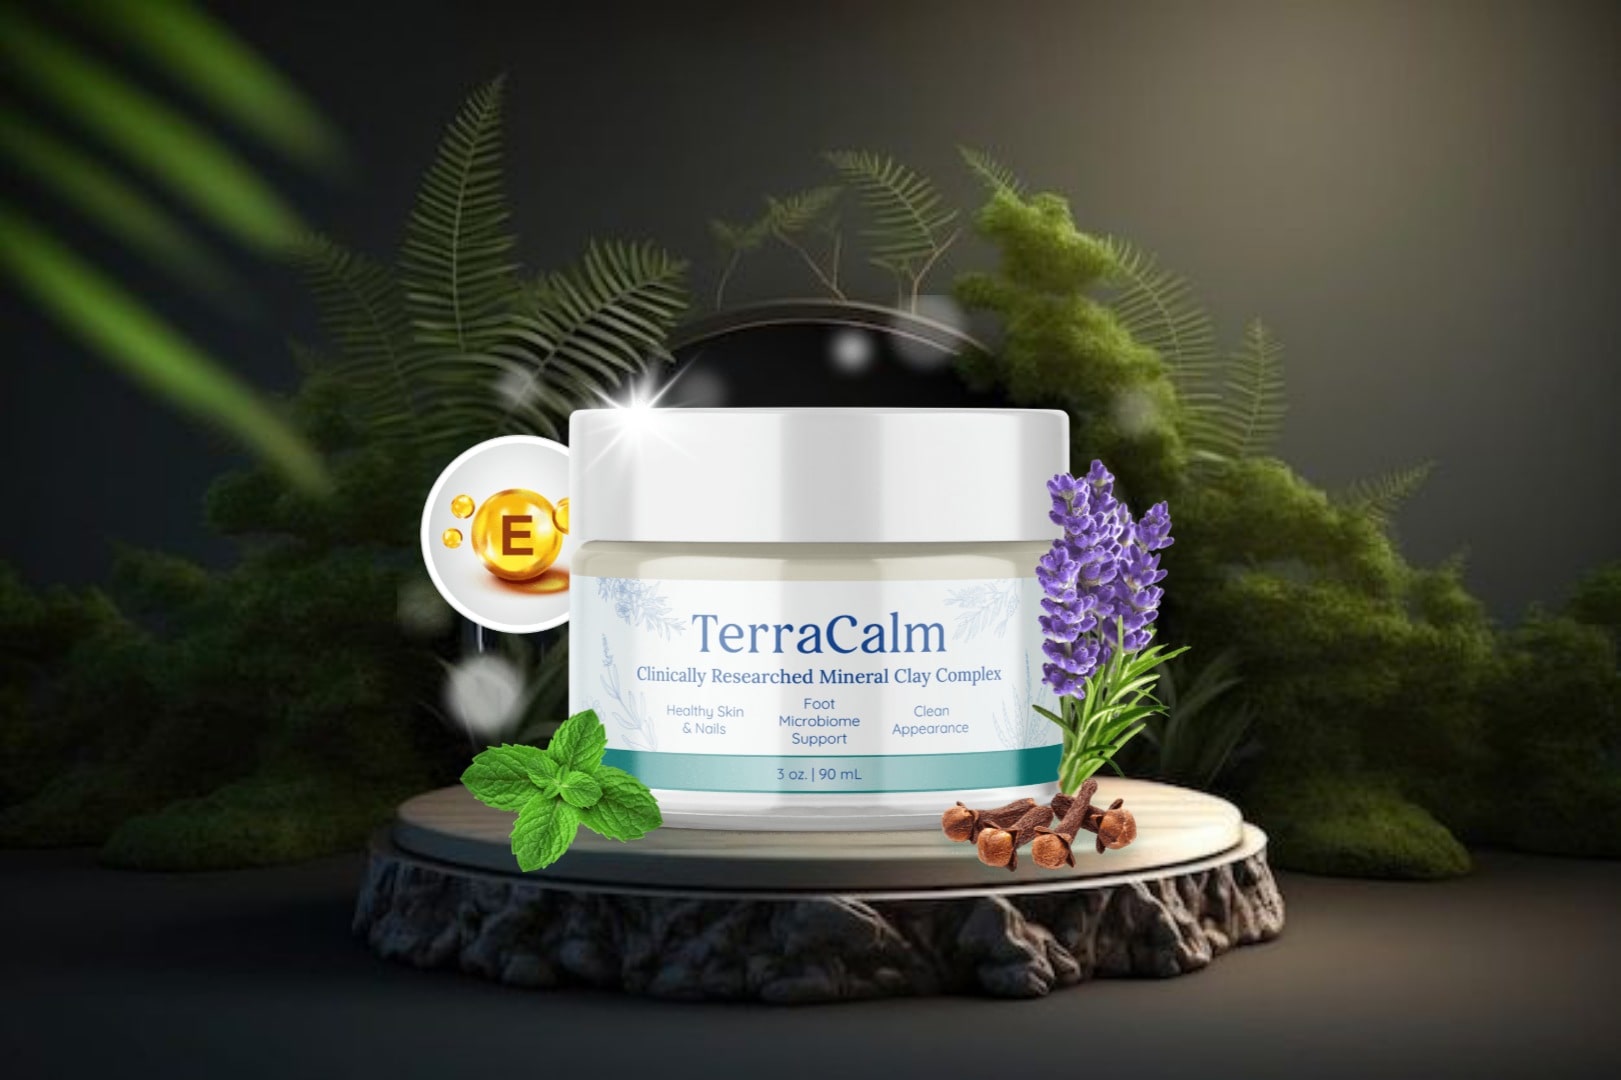 TerraCalm Review (IMPORTANT ALERT!!) TerraCalm Supplement Nail Fungus – TerraCalm really works?